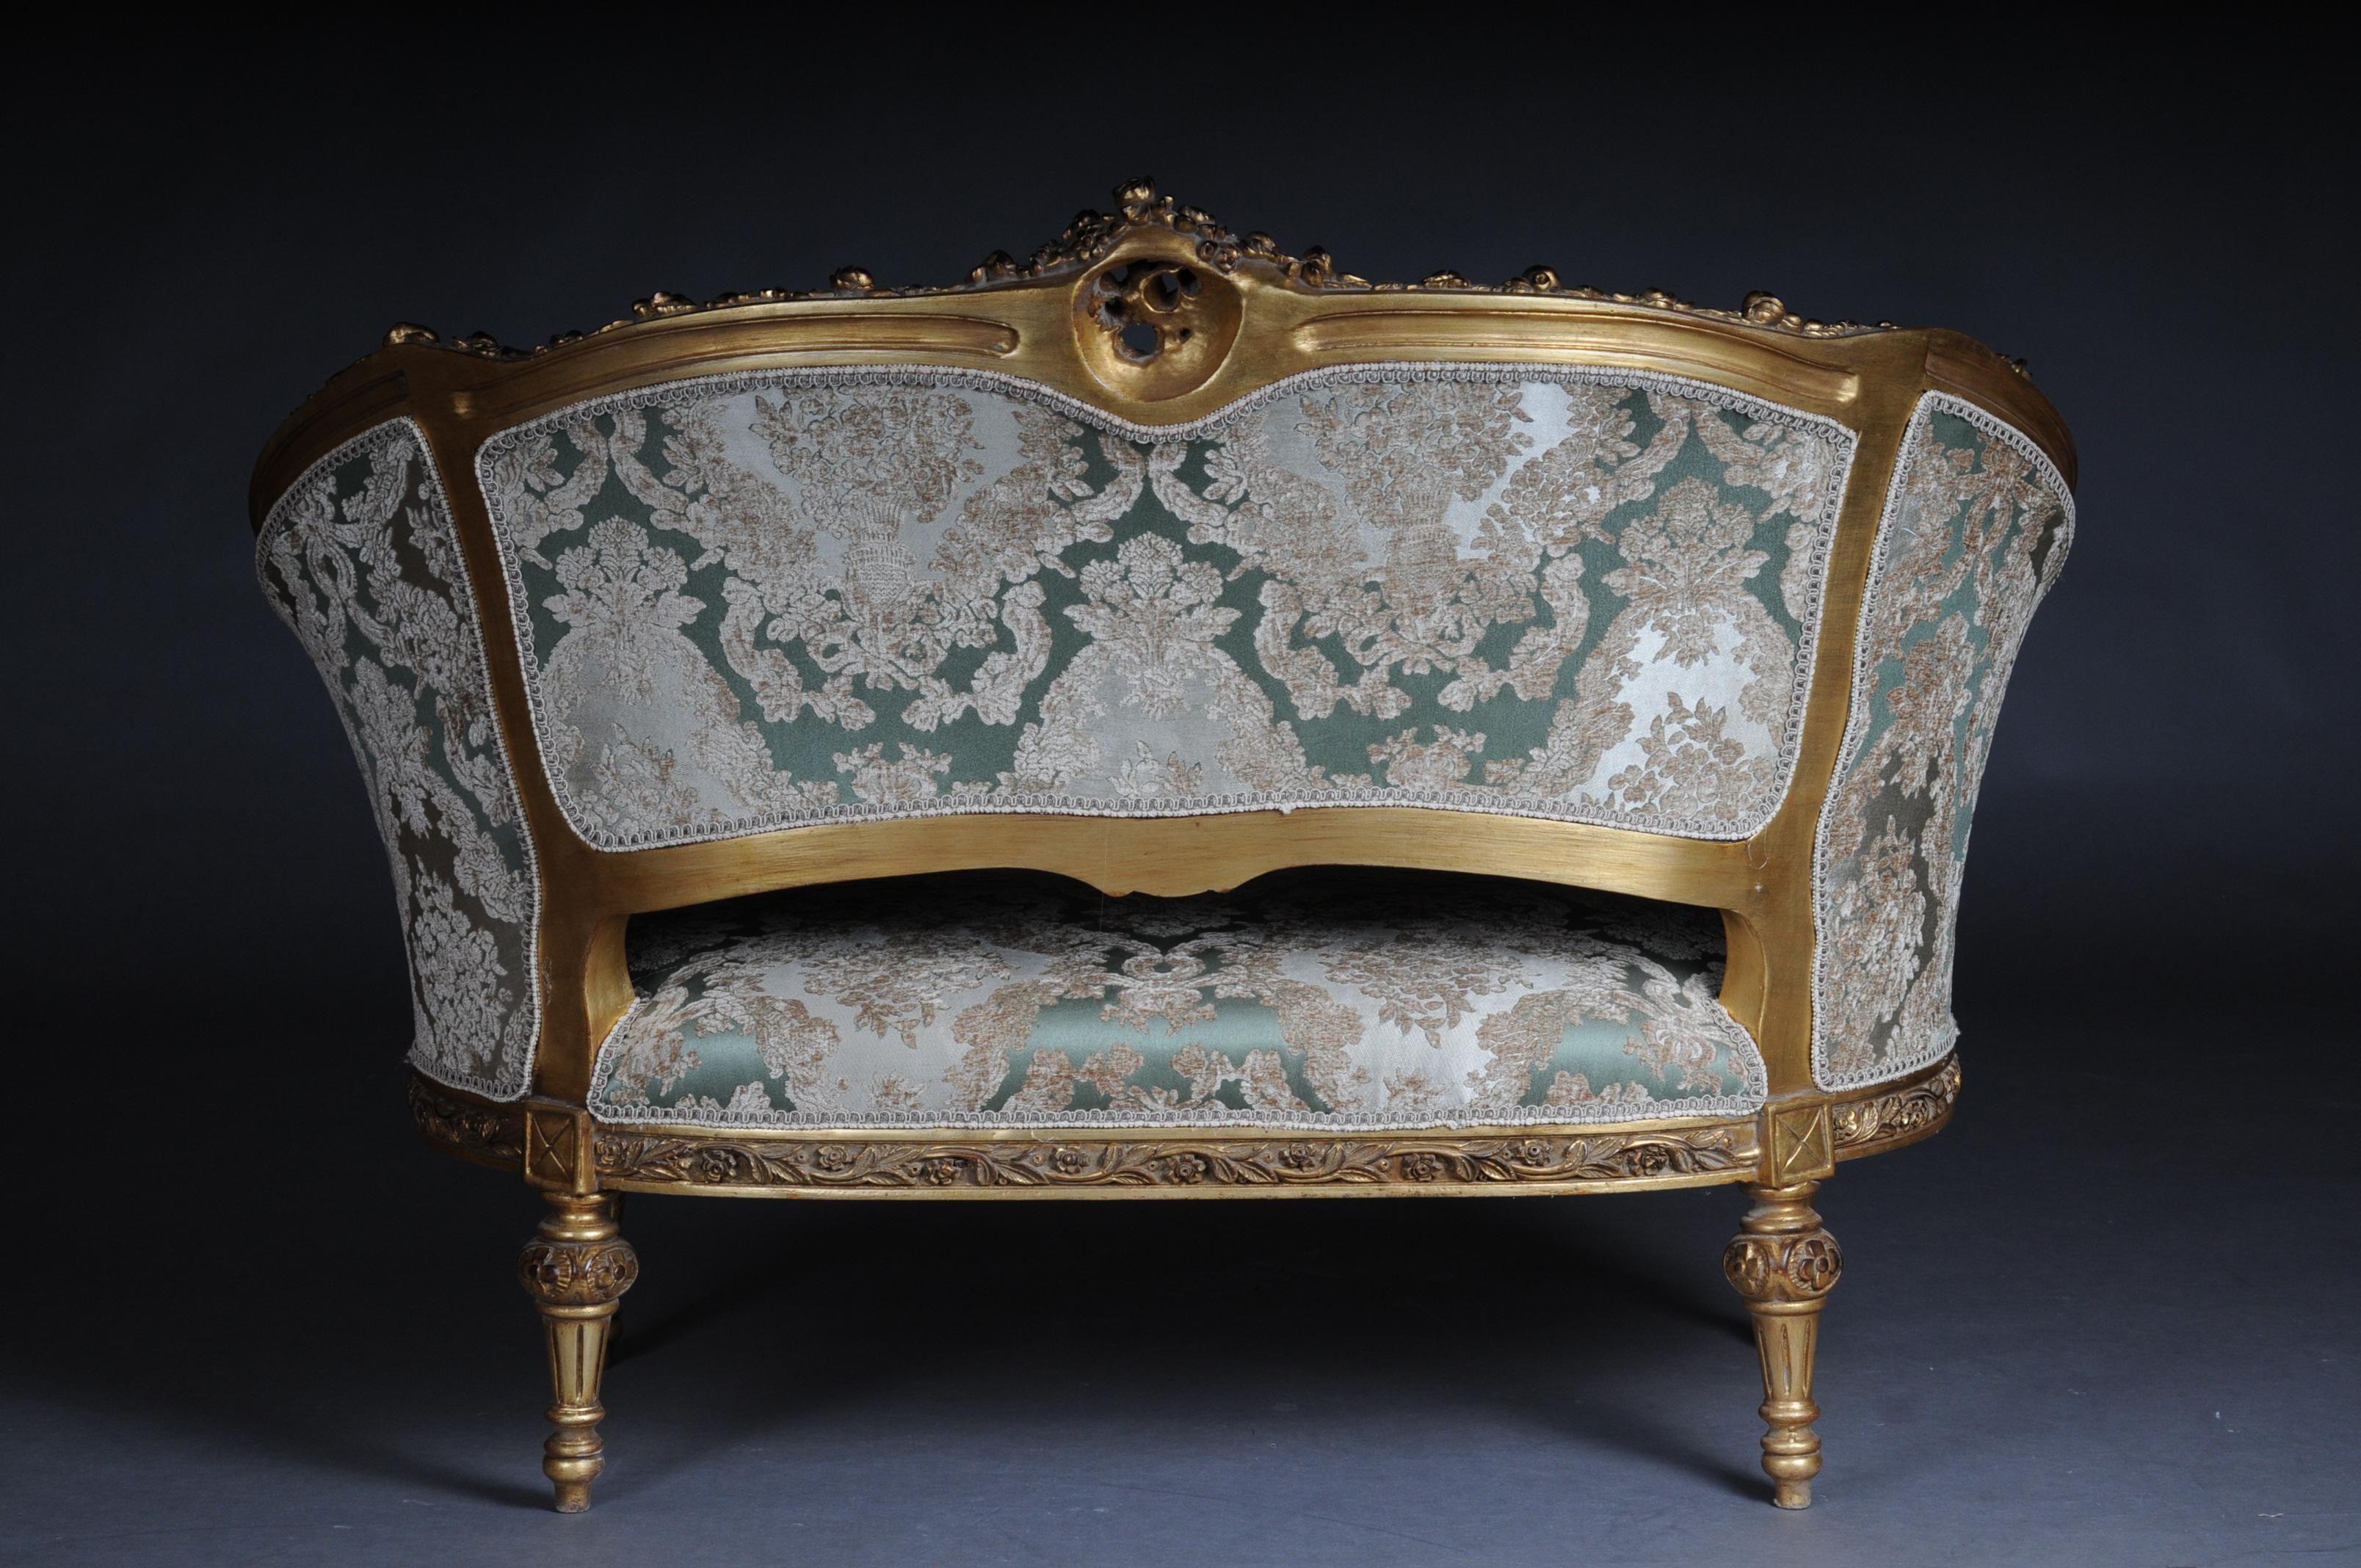 20th Century Elegant Sofa, Canapé, Couch in Rococo or Louis XV Style